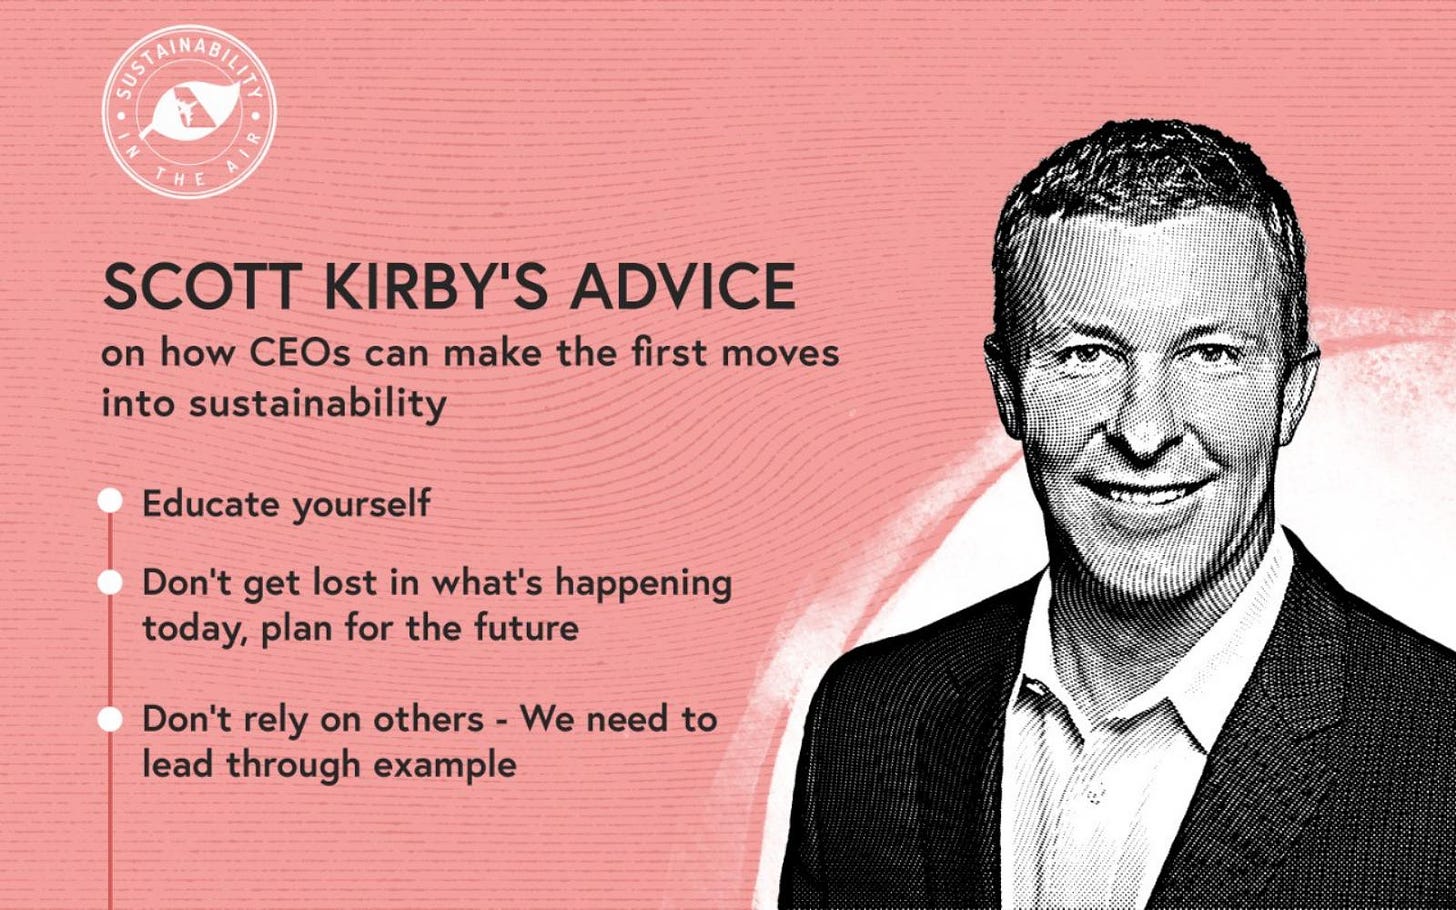 United Airlines' CEO Scott Kirby's advice to CEOs to make the first moves into sustainability.